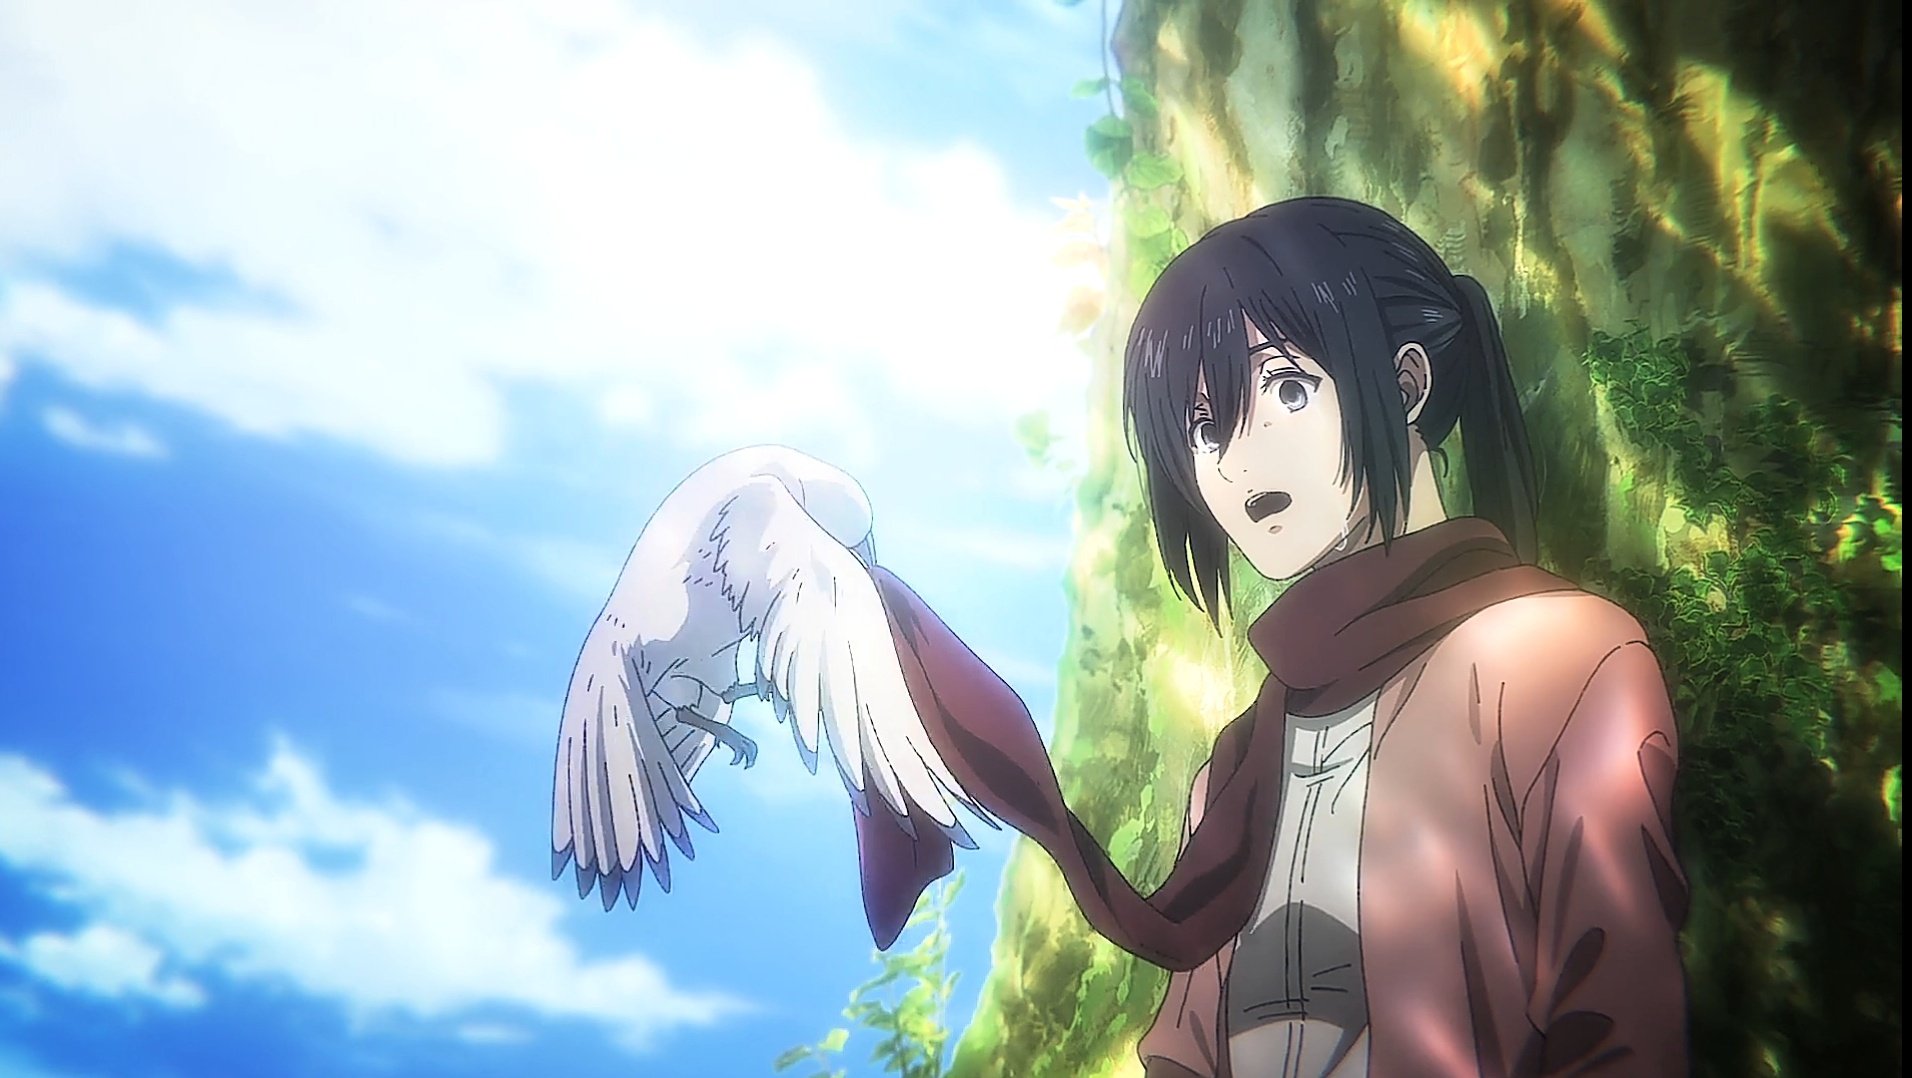 Attack On Titan Final Episode Recap -The End Is Here - Mikasa